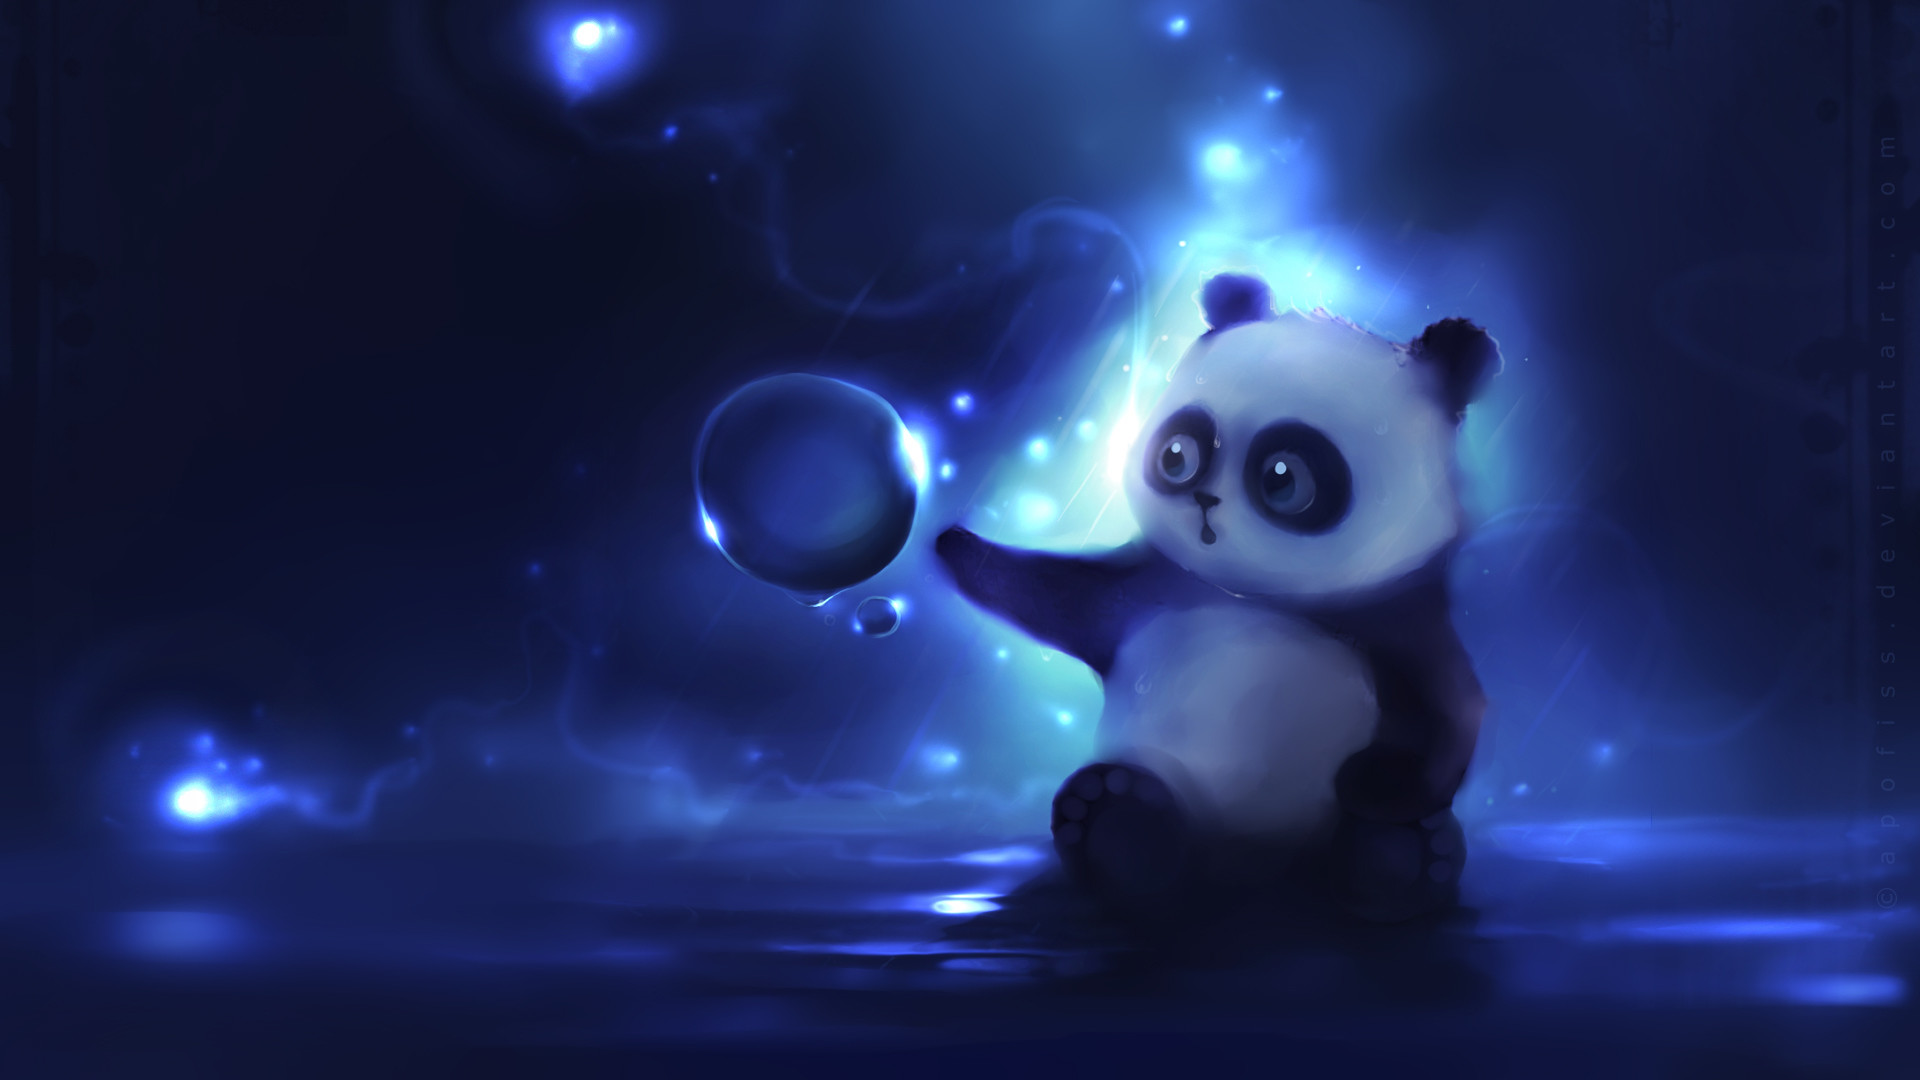 1920x1080 undefined Cute Wallpapers Hd (56 Wallpapers) | Adorable Wallpapers